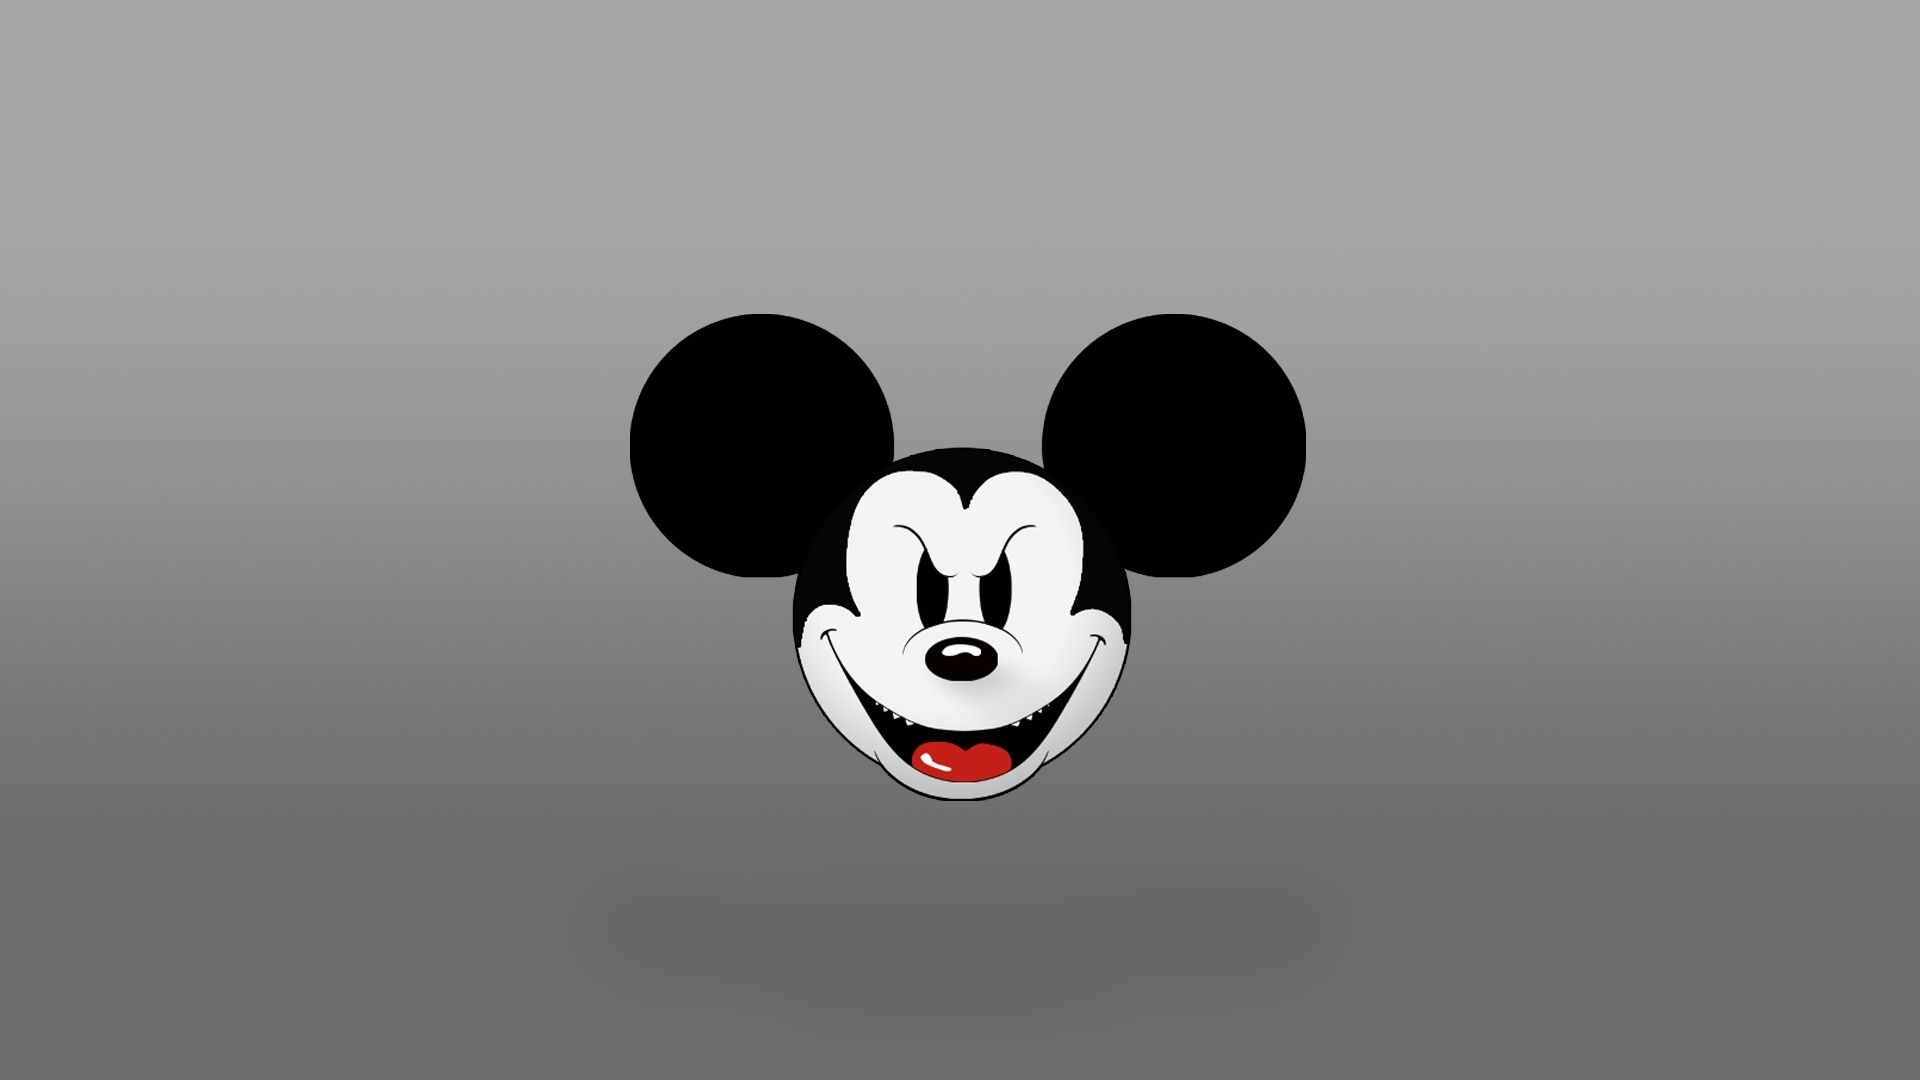 Full HD 1080p Mickey mouse Wallpapers HD, Desktop Backgrounds ...